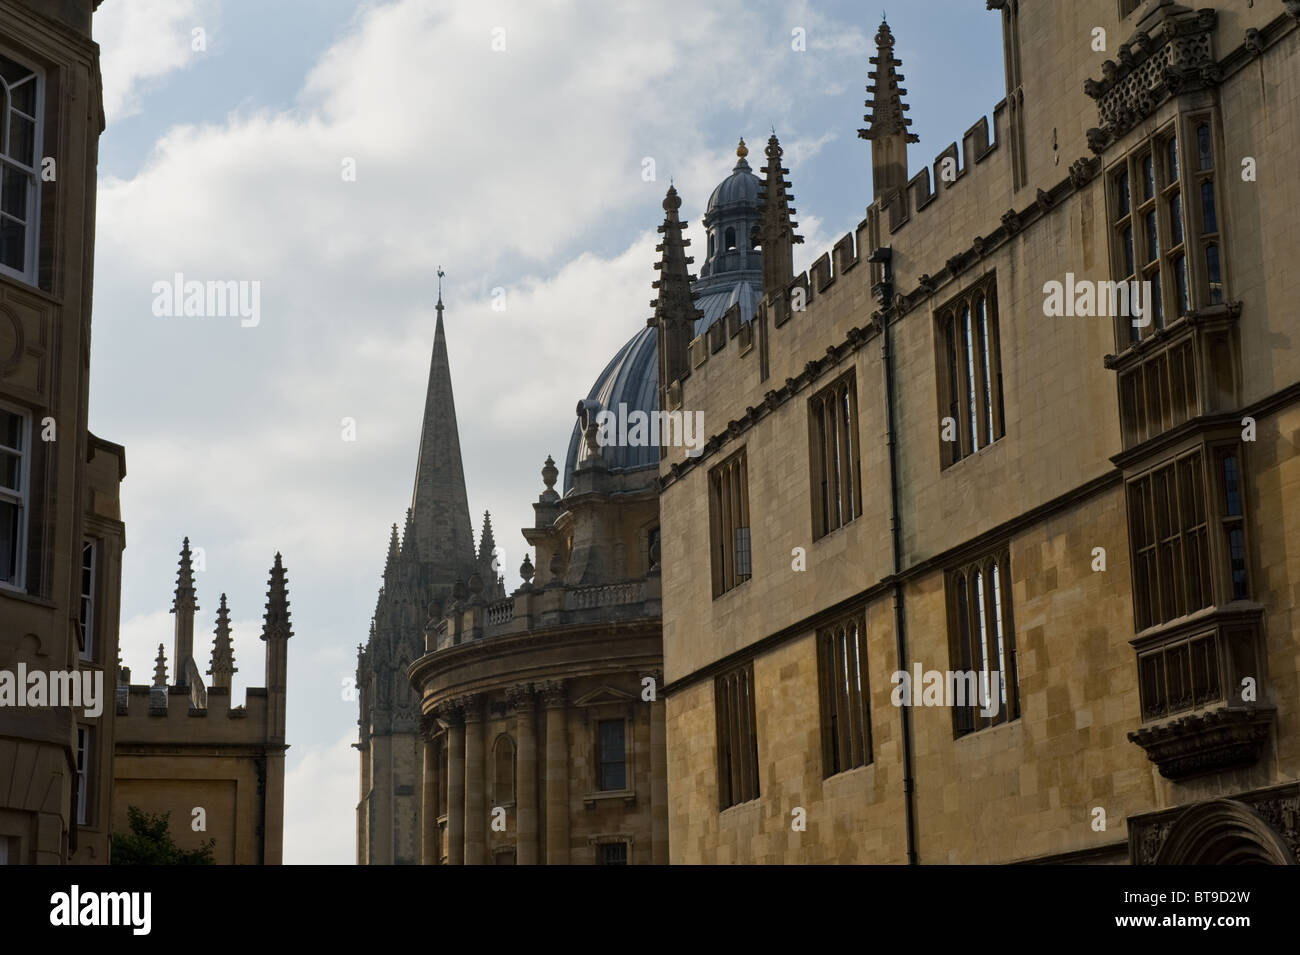 Oxford University architecture showing the roofs of the Radcliffe Camera and St Marys Church Stock Photo